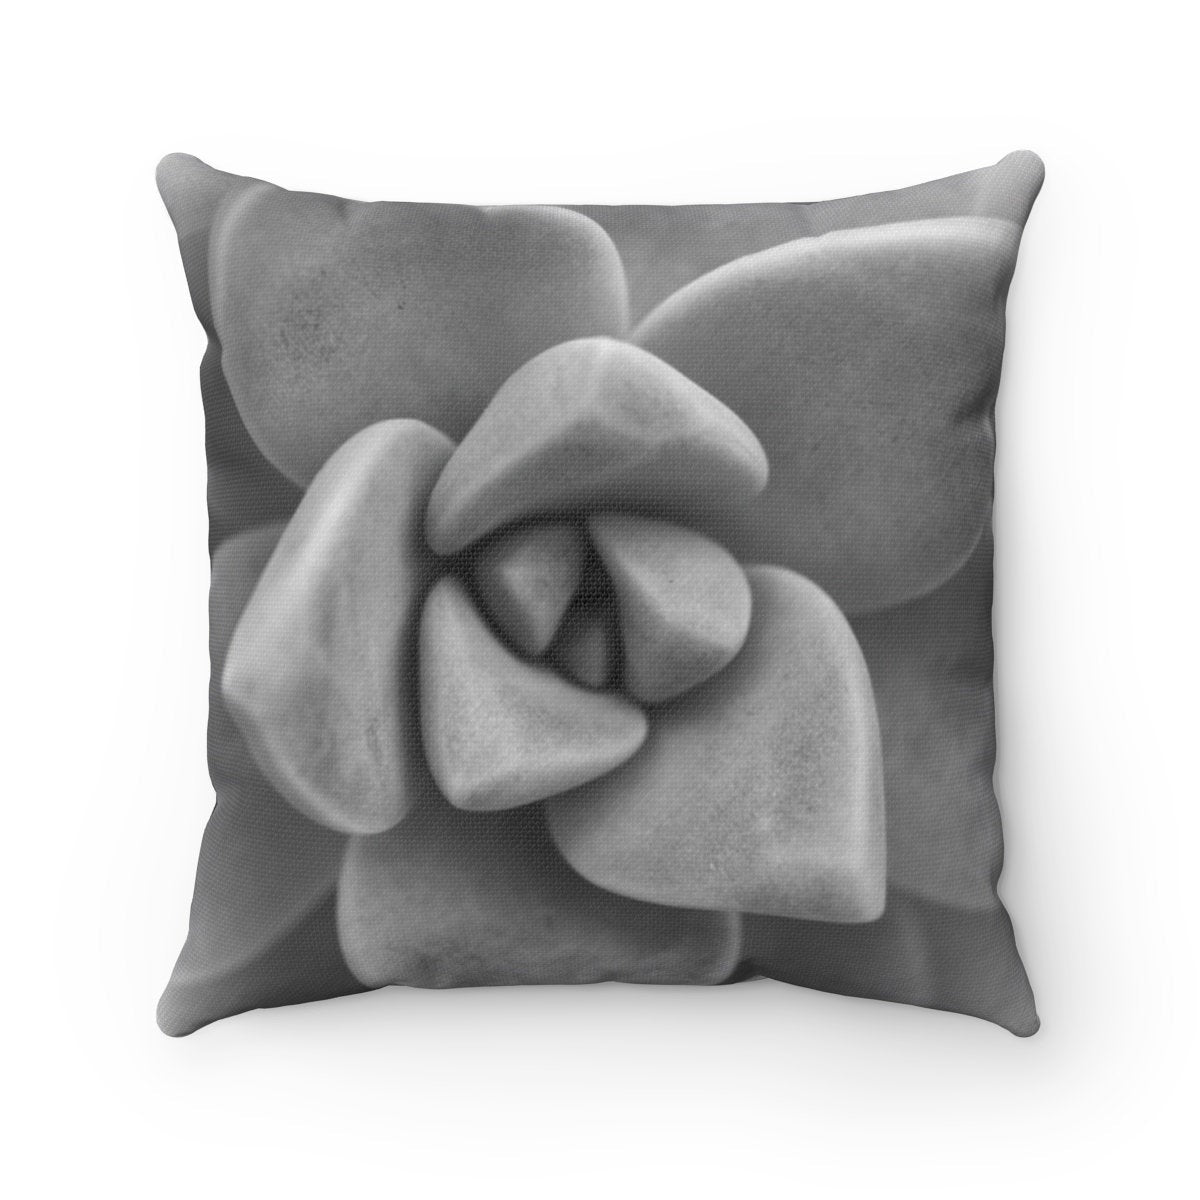 Black and White Cushion Covers, Flower Photograph Pillow, Botanical Pillow Covers, Succulent Pillow, Floral Accent Pillow - EONS-PLW10